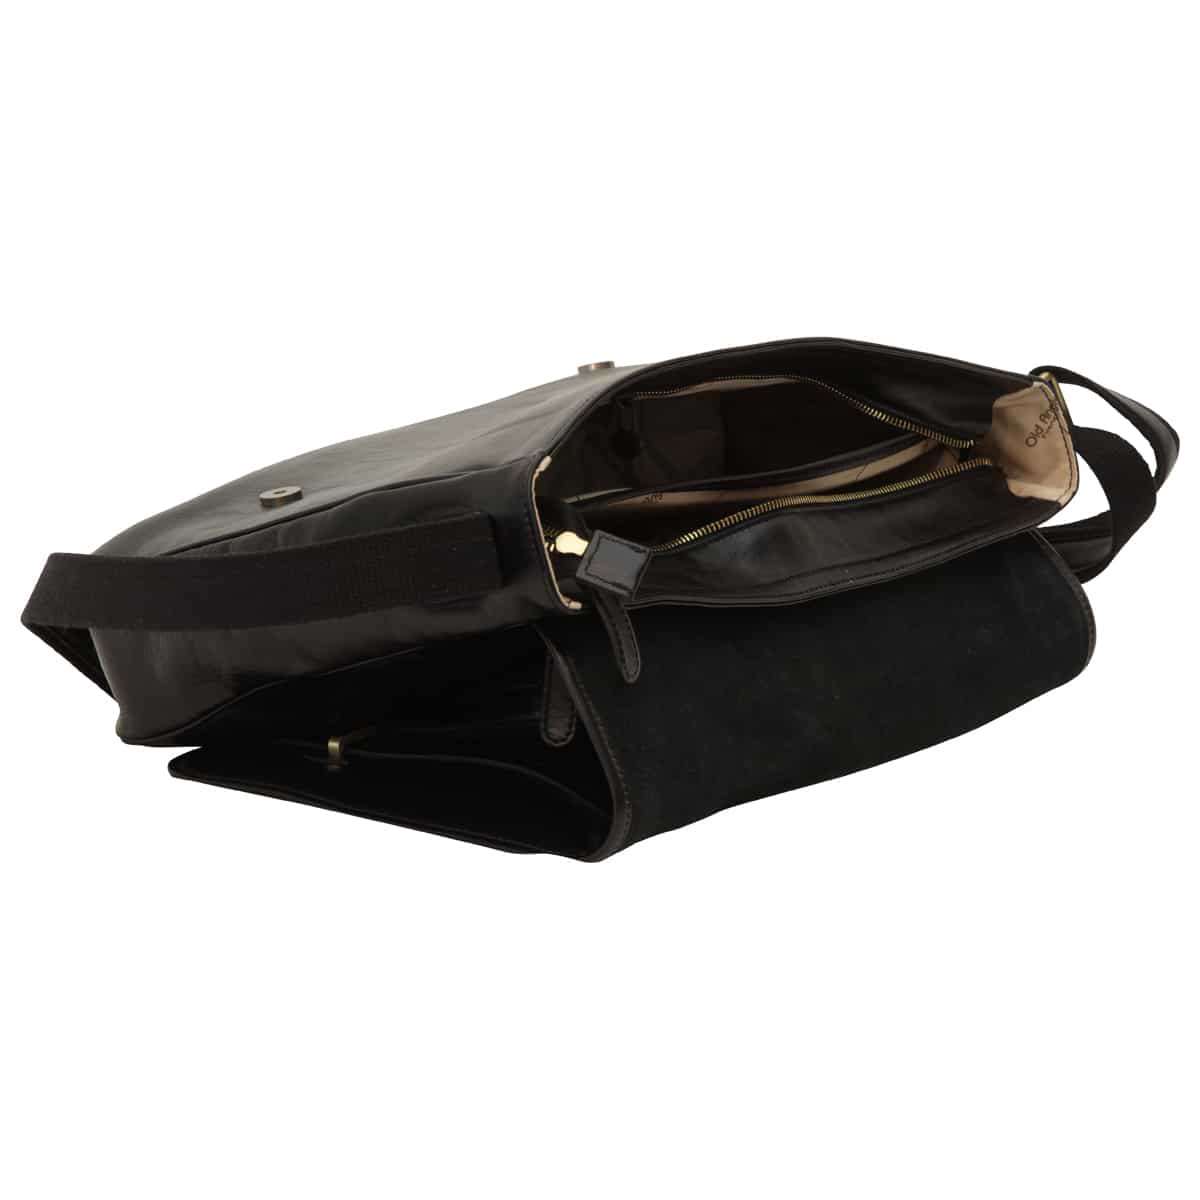 Large leather bag with magnetic closure - Black | 406489NE | EURO | Old Angler Firenze